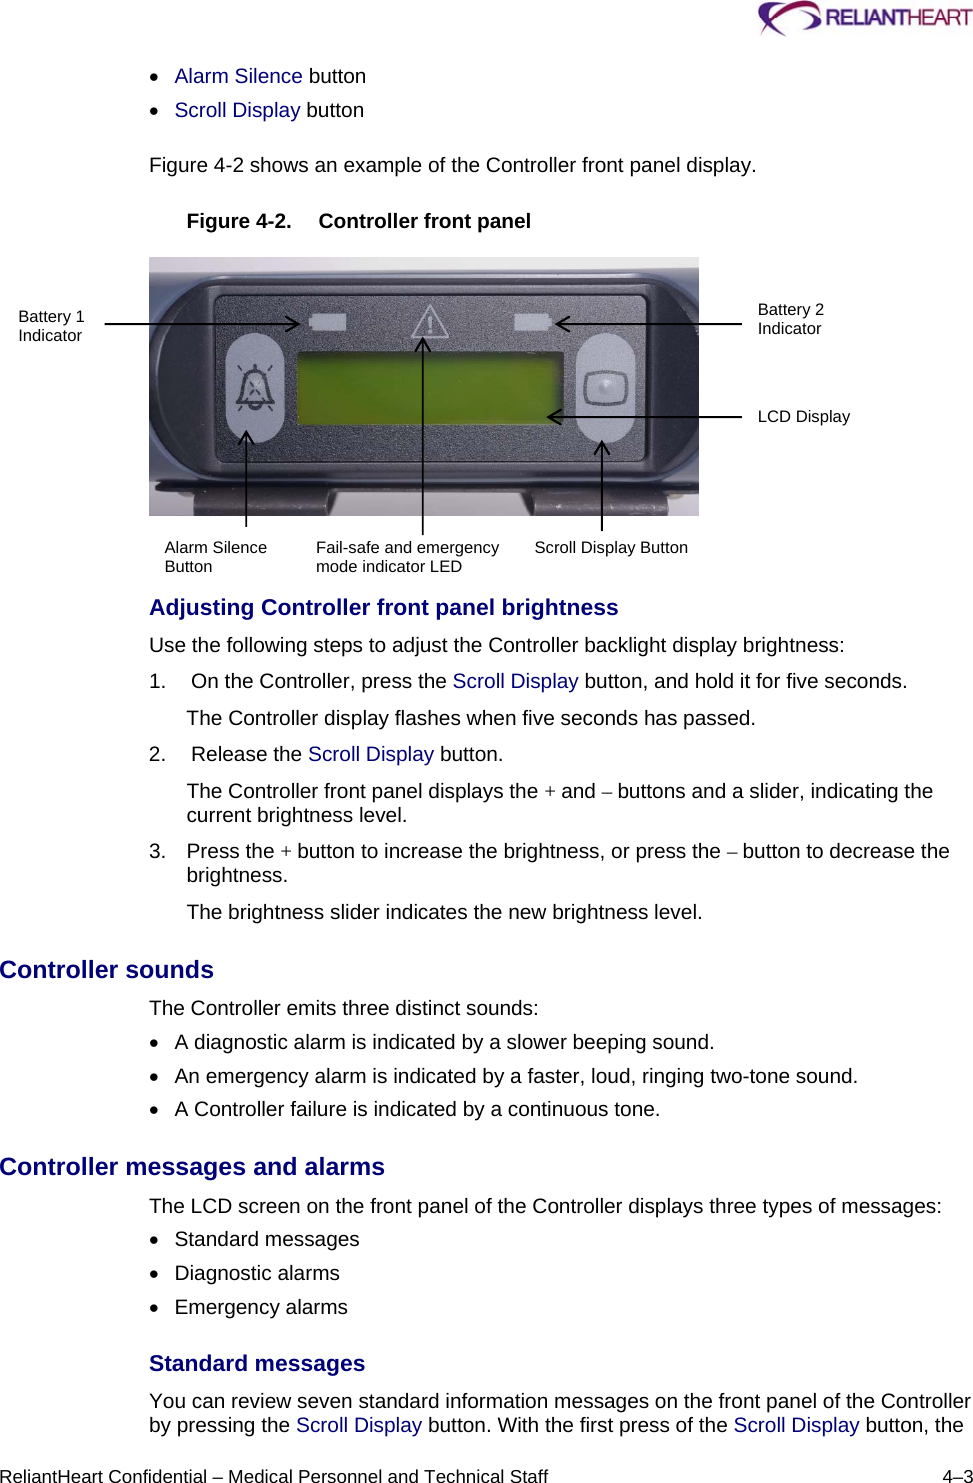     ReliantHeart Confidential – Medical Personnel and Technical Staff  4–3  Alarm Silence button  Scroll Display button  Figure 4-2 shows an example of the Controller front panel display.  Figure 4-2.  Controller front panel      Adjusting Controller front panel brightness Use the following steps to adjust the Controller backlight display brightness: 1.   On the Controller, press the Scroll Display button, and hold it for five seconds. The Controller display flashes when five seconds has passed. 2.   Release the Scroll Display button. The Controller front panel displays the + and – buttons and a slider, indicating the current brightness level. 3. Press the + button to increase the brightness, or press the – button to decrease the brightness. The brightness slider indicates the new brightness level. Controller sounds  The Controller emits three distinct sounds:    A diagnostic alarm is indicated by a slower beeping sound.    An emergency alarm is indicated by a faster, loud, ringing two-tone sound.    A Controller failure is indicated by a continuous tone.  Controller messages and alarms  The LCD screen on the front panel of the Controller displays three types of messages:   Standard messages    Diagnostic alarms    Emergency alarms  Standard messages  You can review seven standard information messages on the front panel of the Controller by pressing the Scroll Display button. With the first press of the Scroll Display button, the Battery 1 Indicator Battery 2 Indicator LCD Display Scroll Display Button Fail-safe and emergency mode indicator LEDAlarm Silence Button 